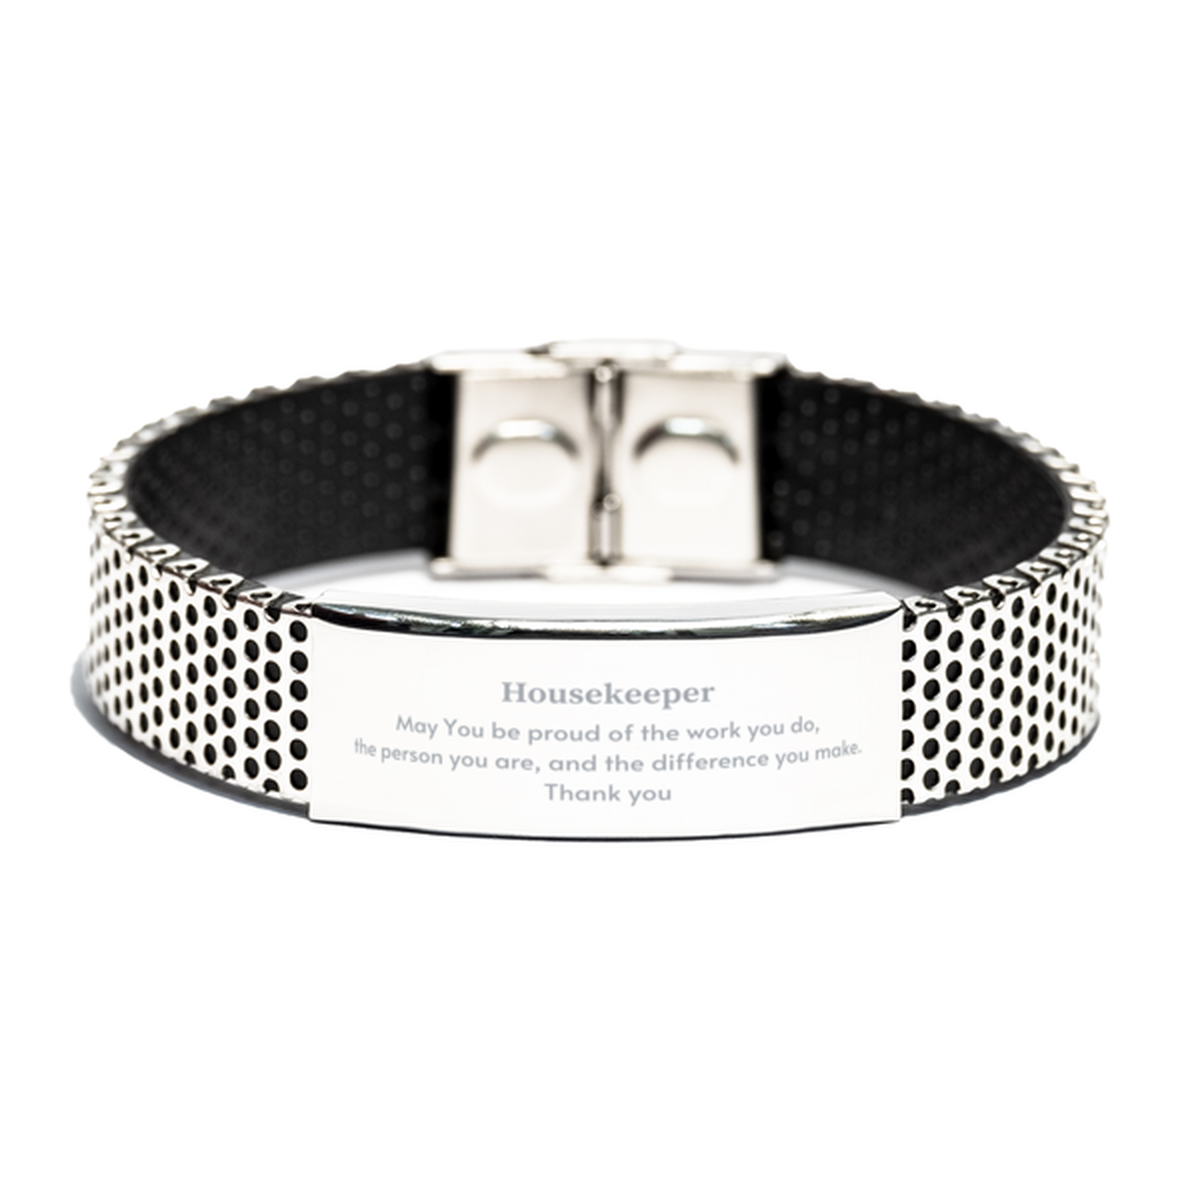 Heartwarming Stainless Steel Bracelet Retirement Coworkers Gifts for Housekeeper, Housekeeper May You be proud of the work you do, the person you are Gifts for Boss Men Women Friends